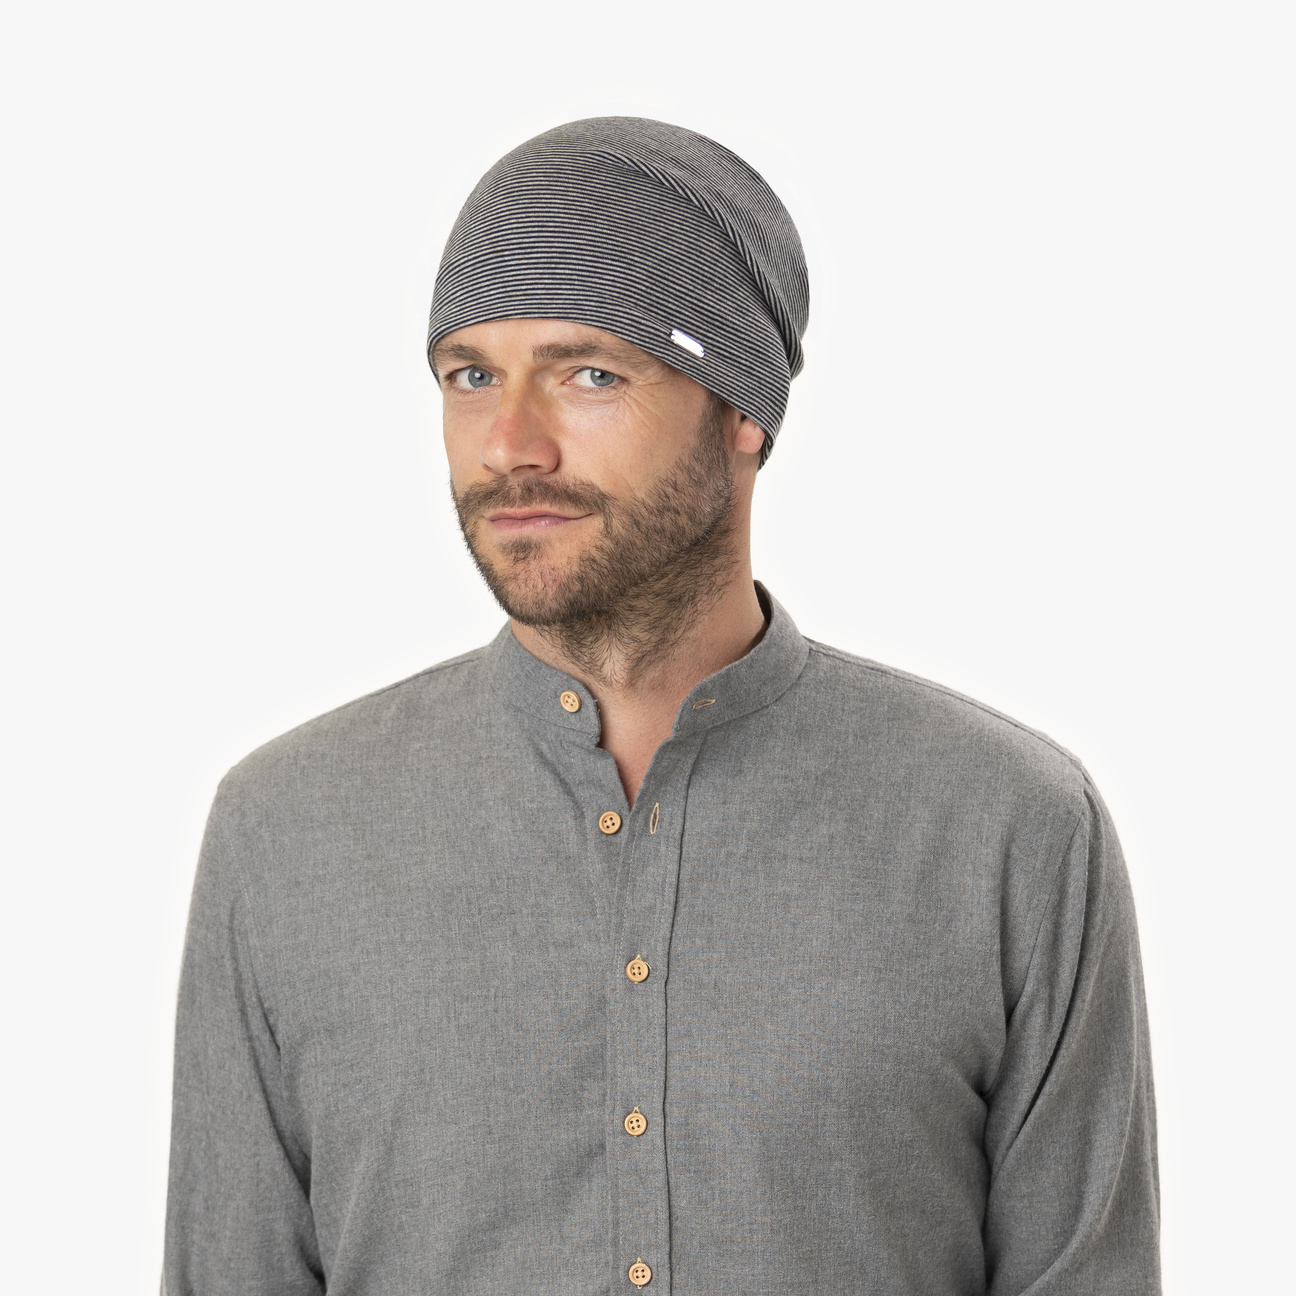 Pittsburgh Oversize Beanie by Chillouts € 24,95 